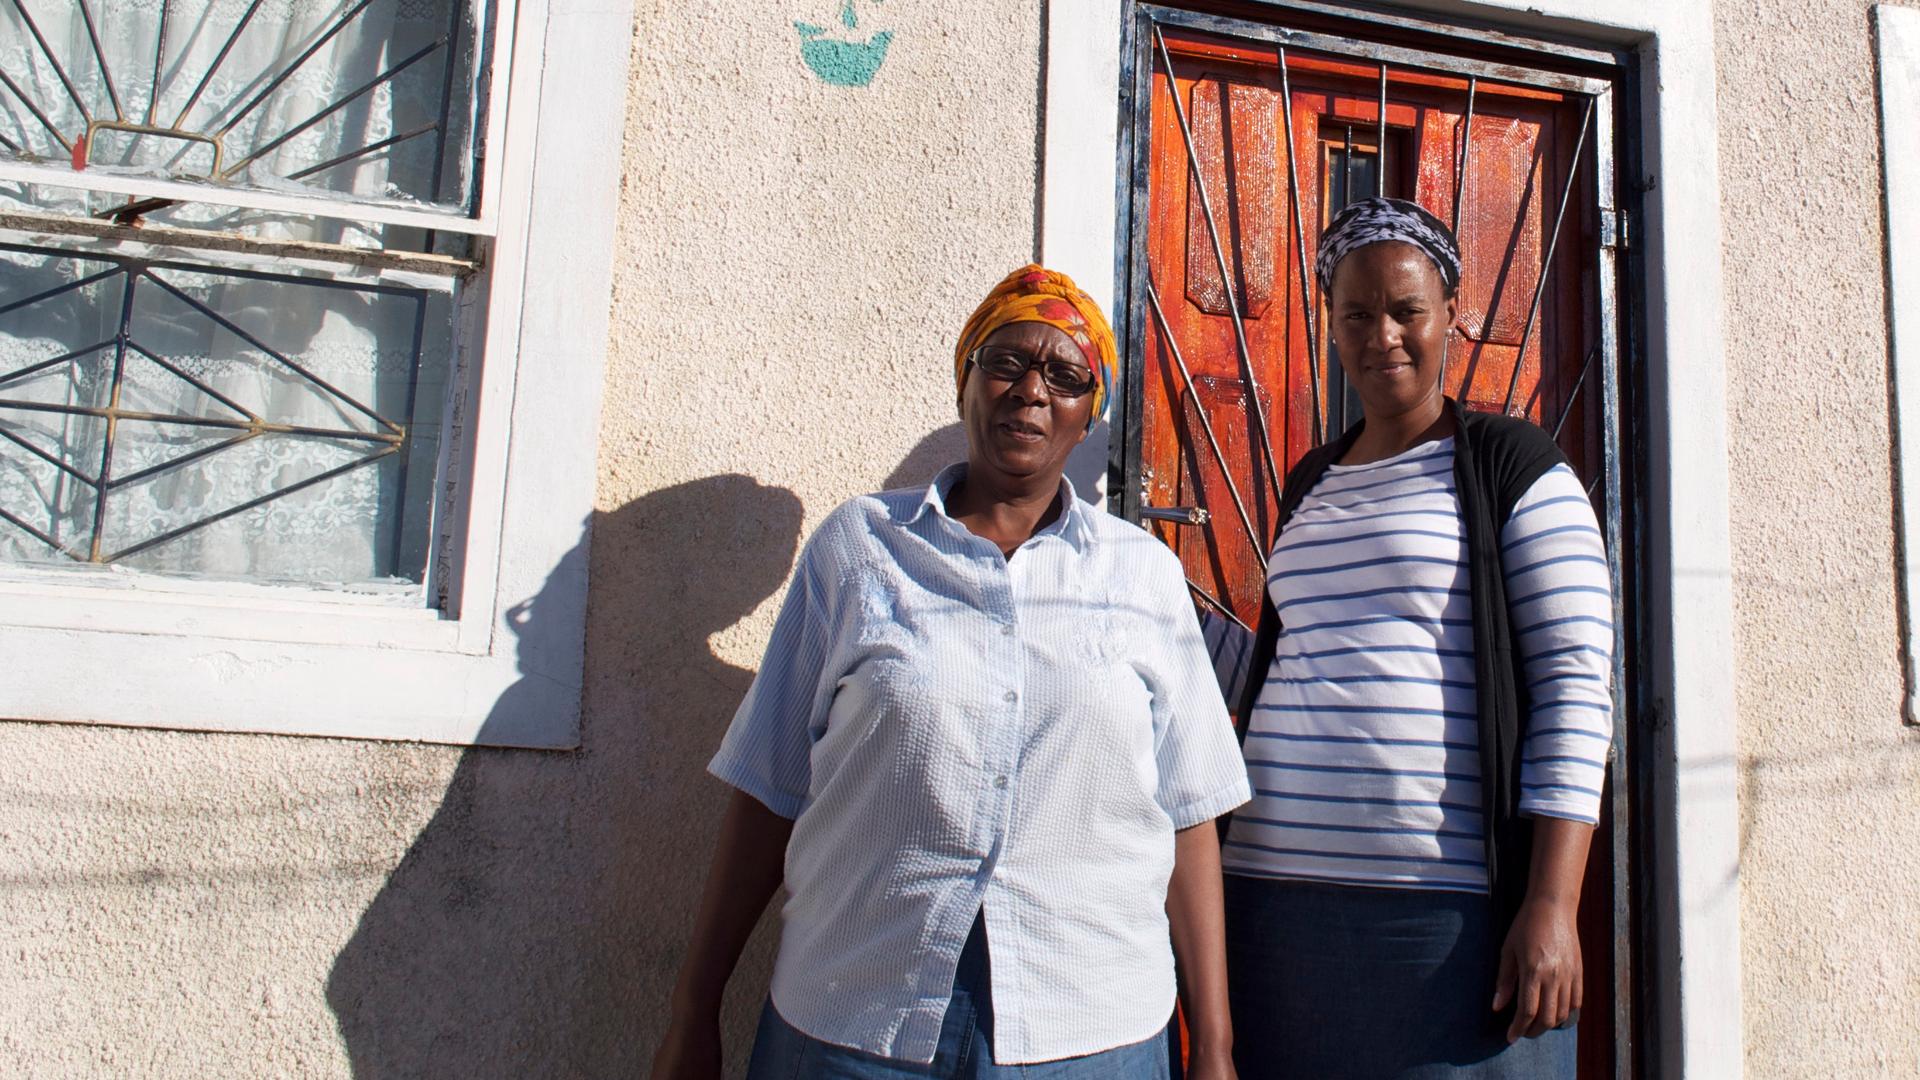 Nora Suselo (R) and her mother Gladys, domestic workers in Cape Town, South Africa.